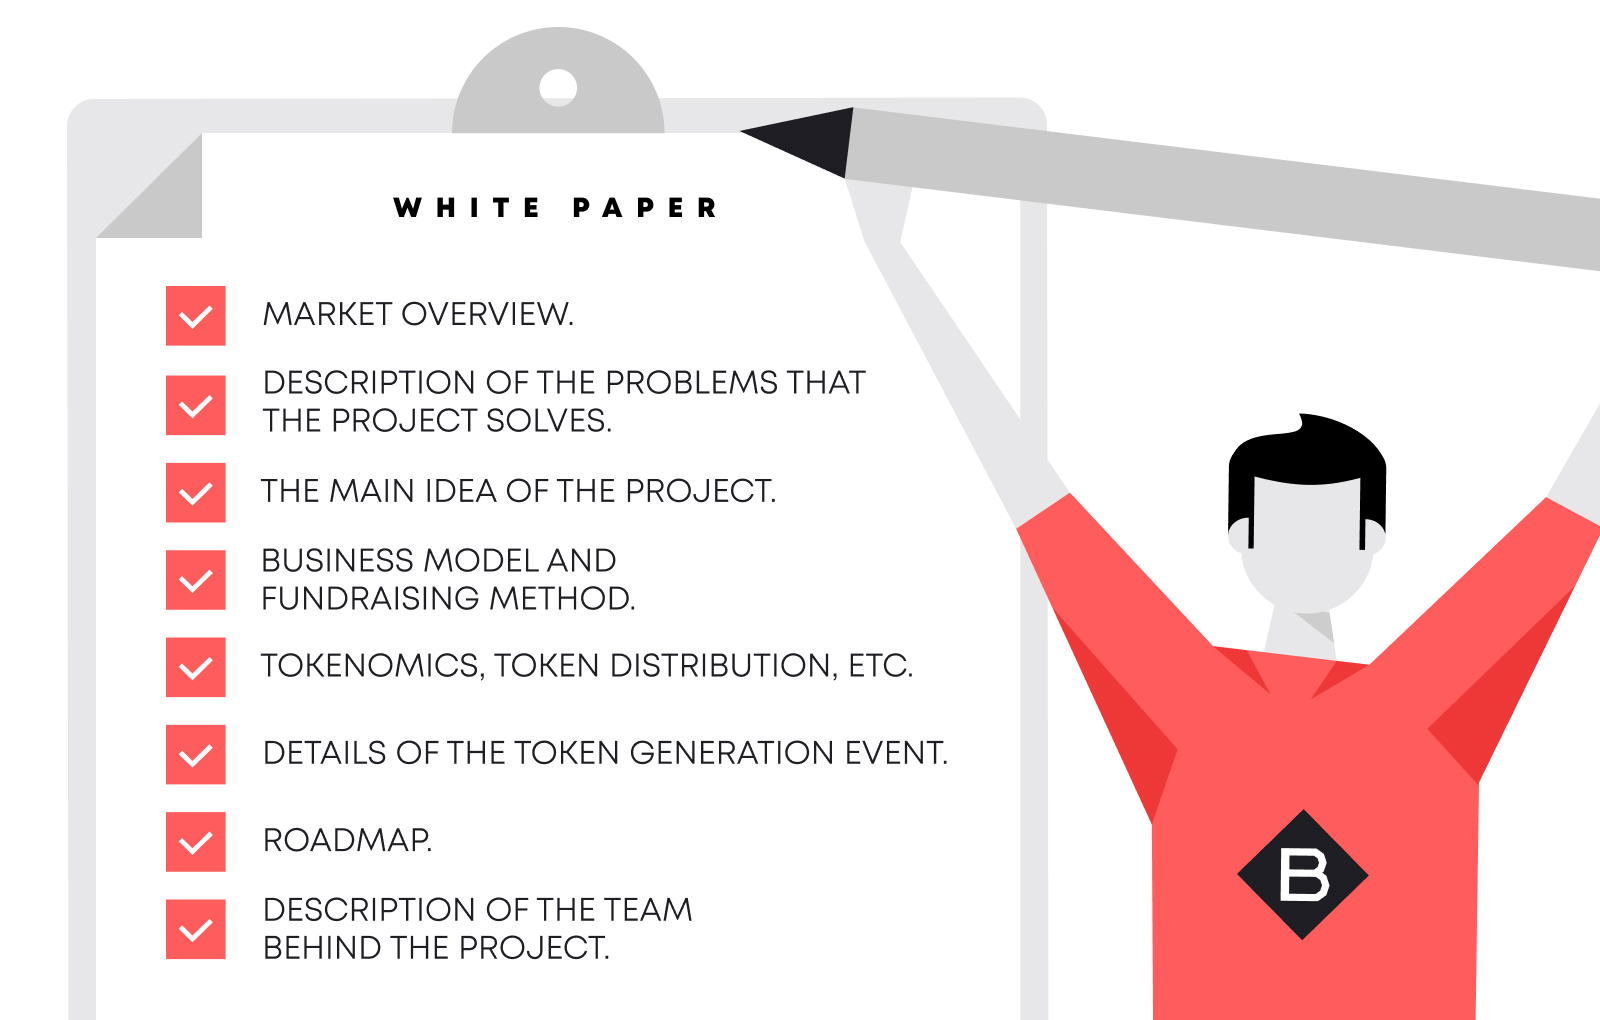 Perfect Whitepaper for the launch of an ICO, IEO, or STO